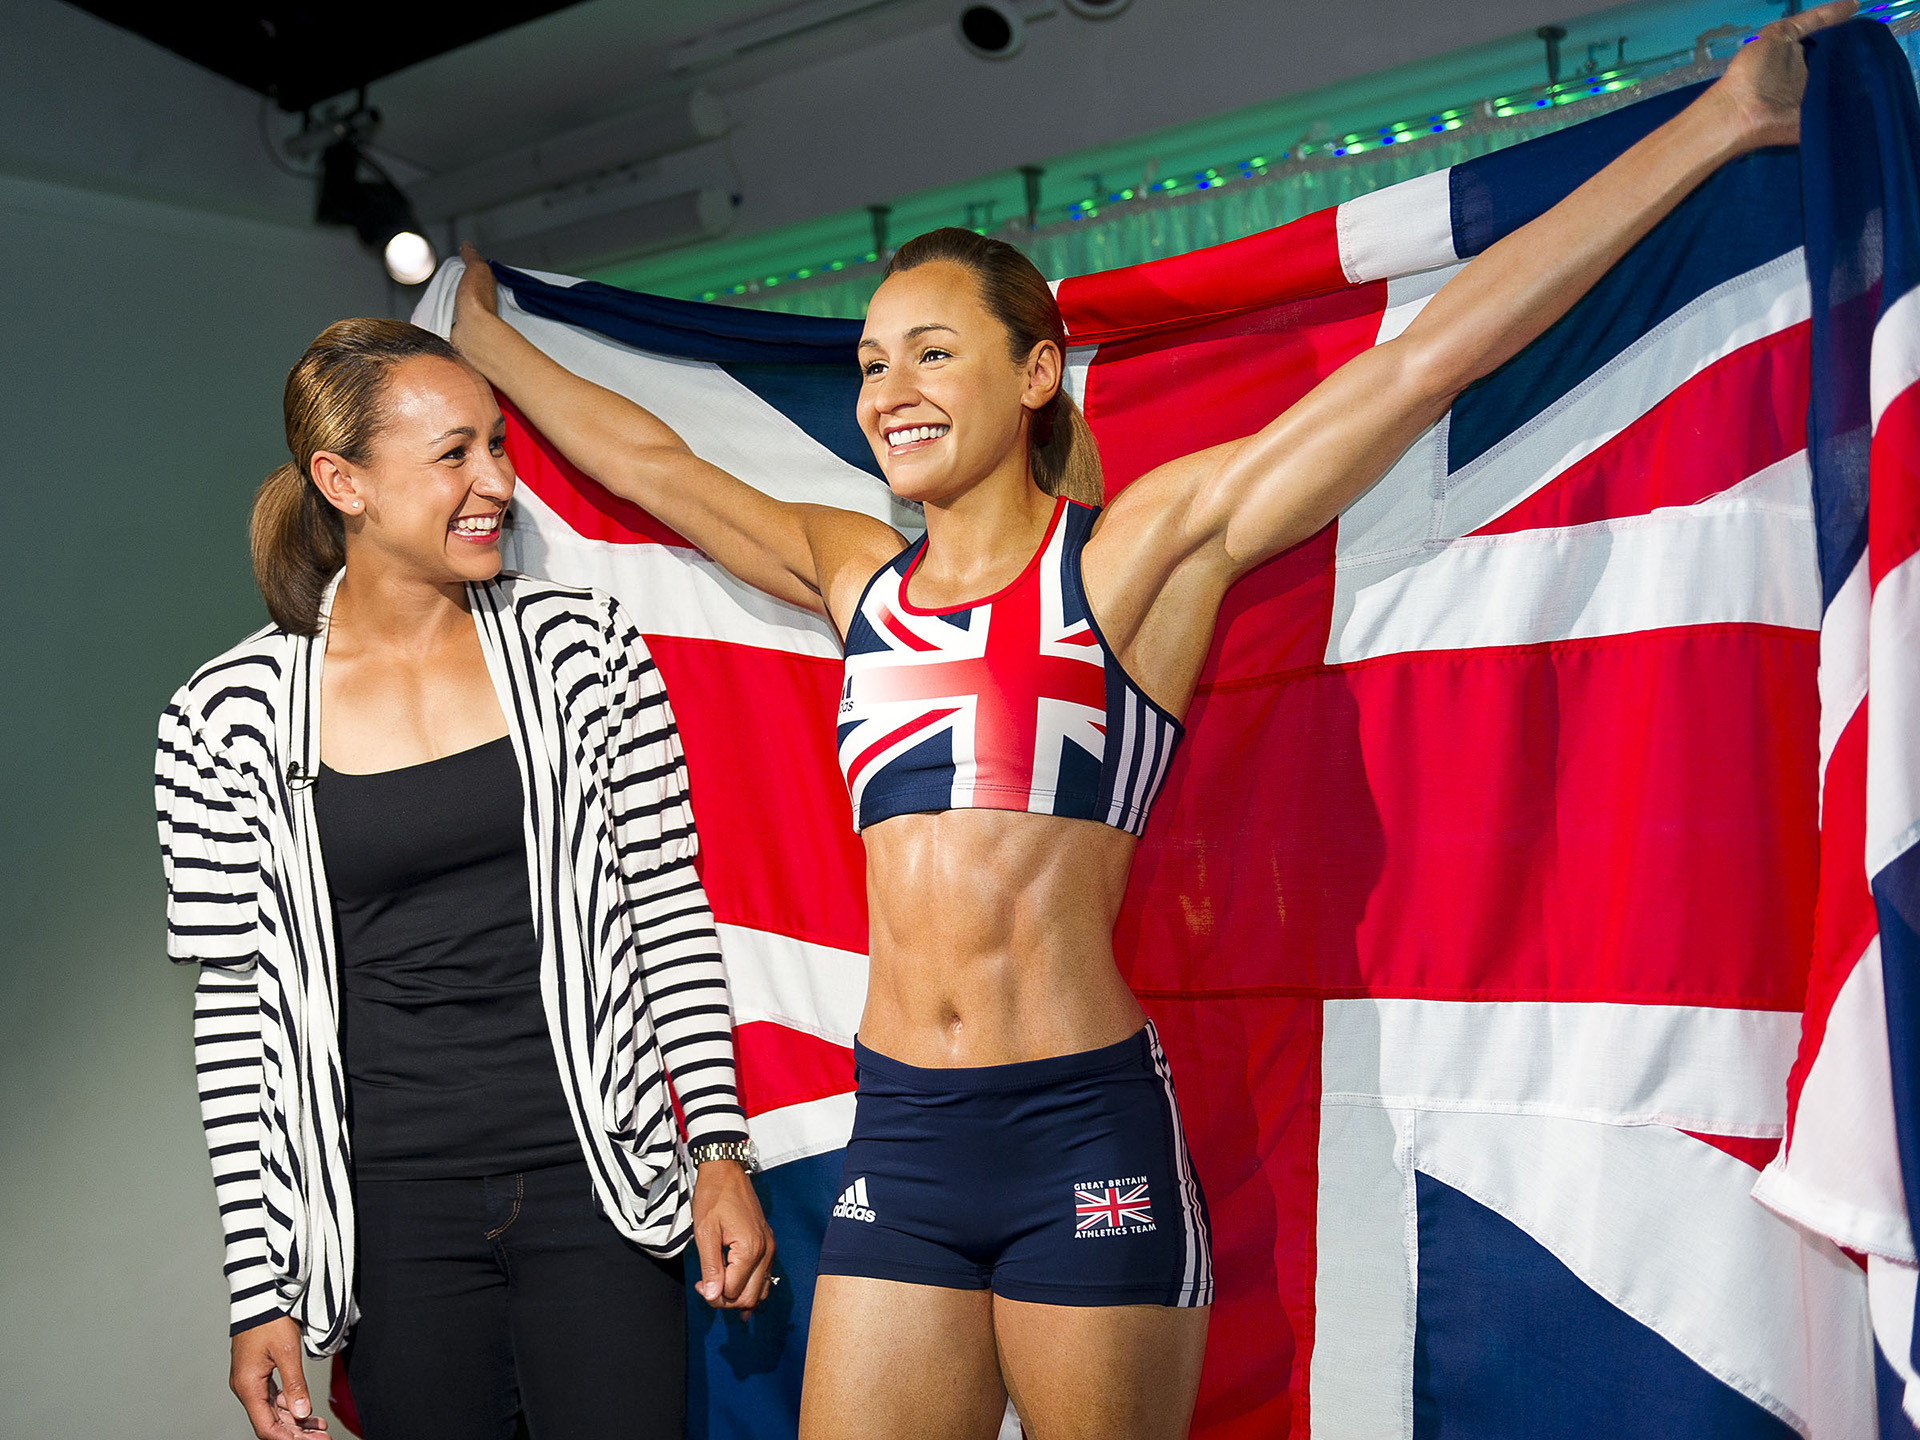 Jessica Ennis-Hill with her own figure holding a Union Jack flag